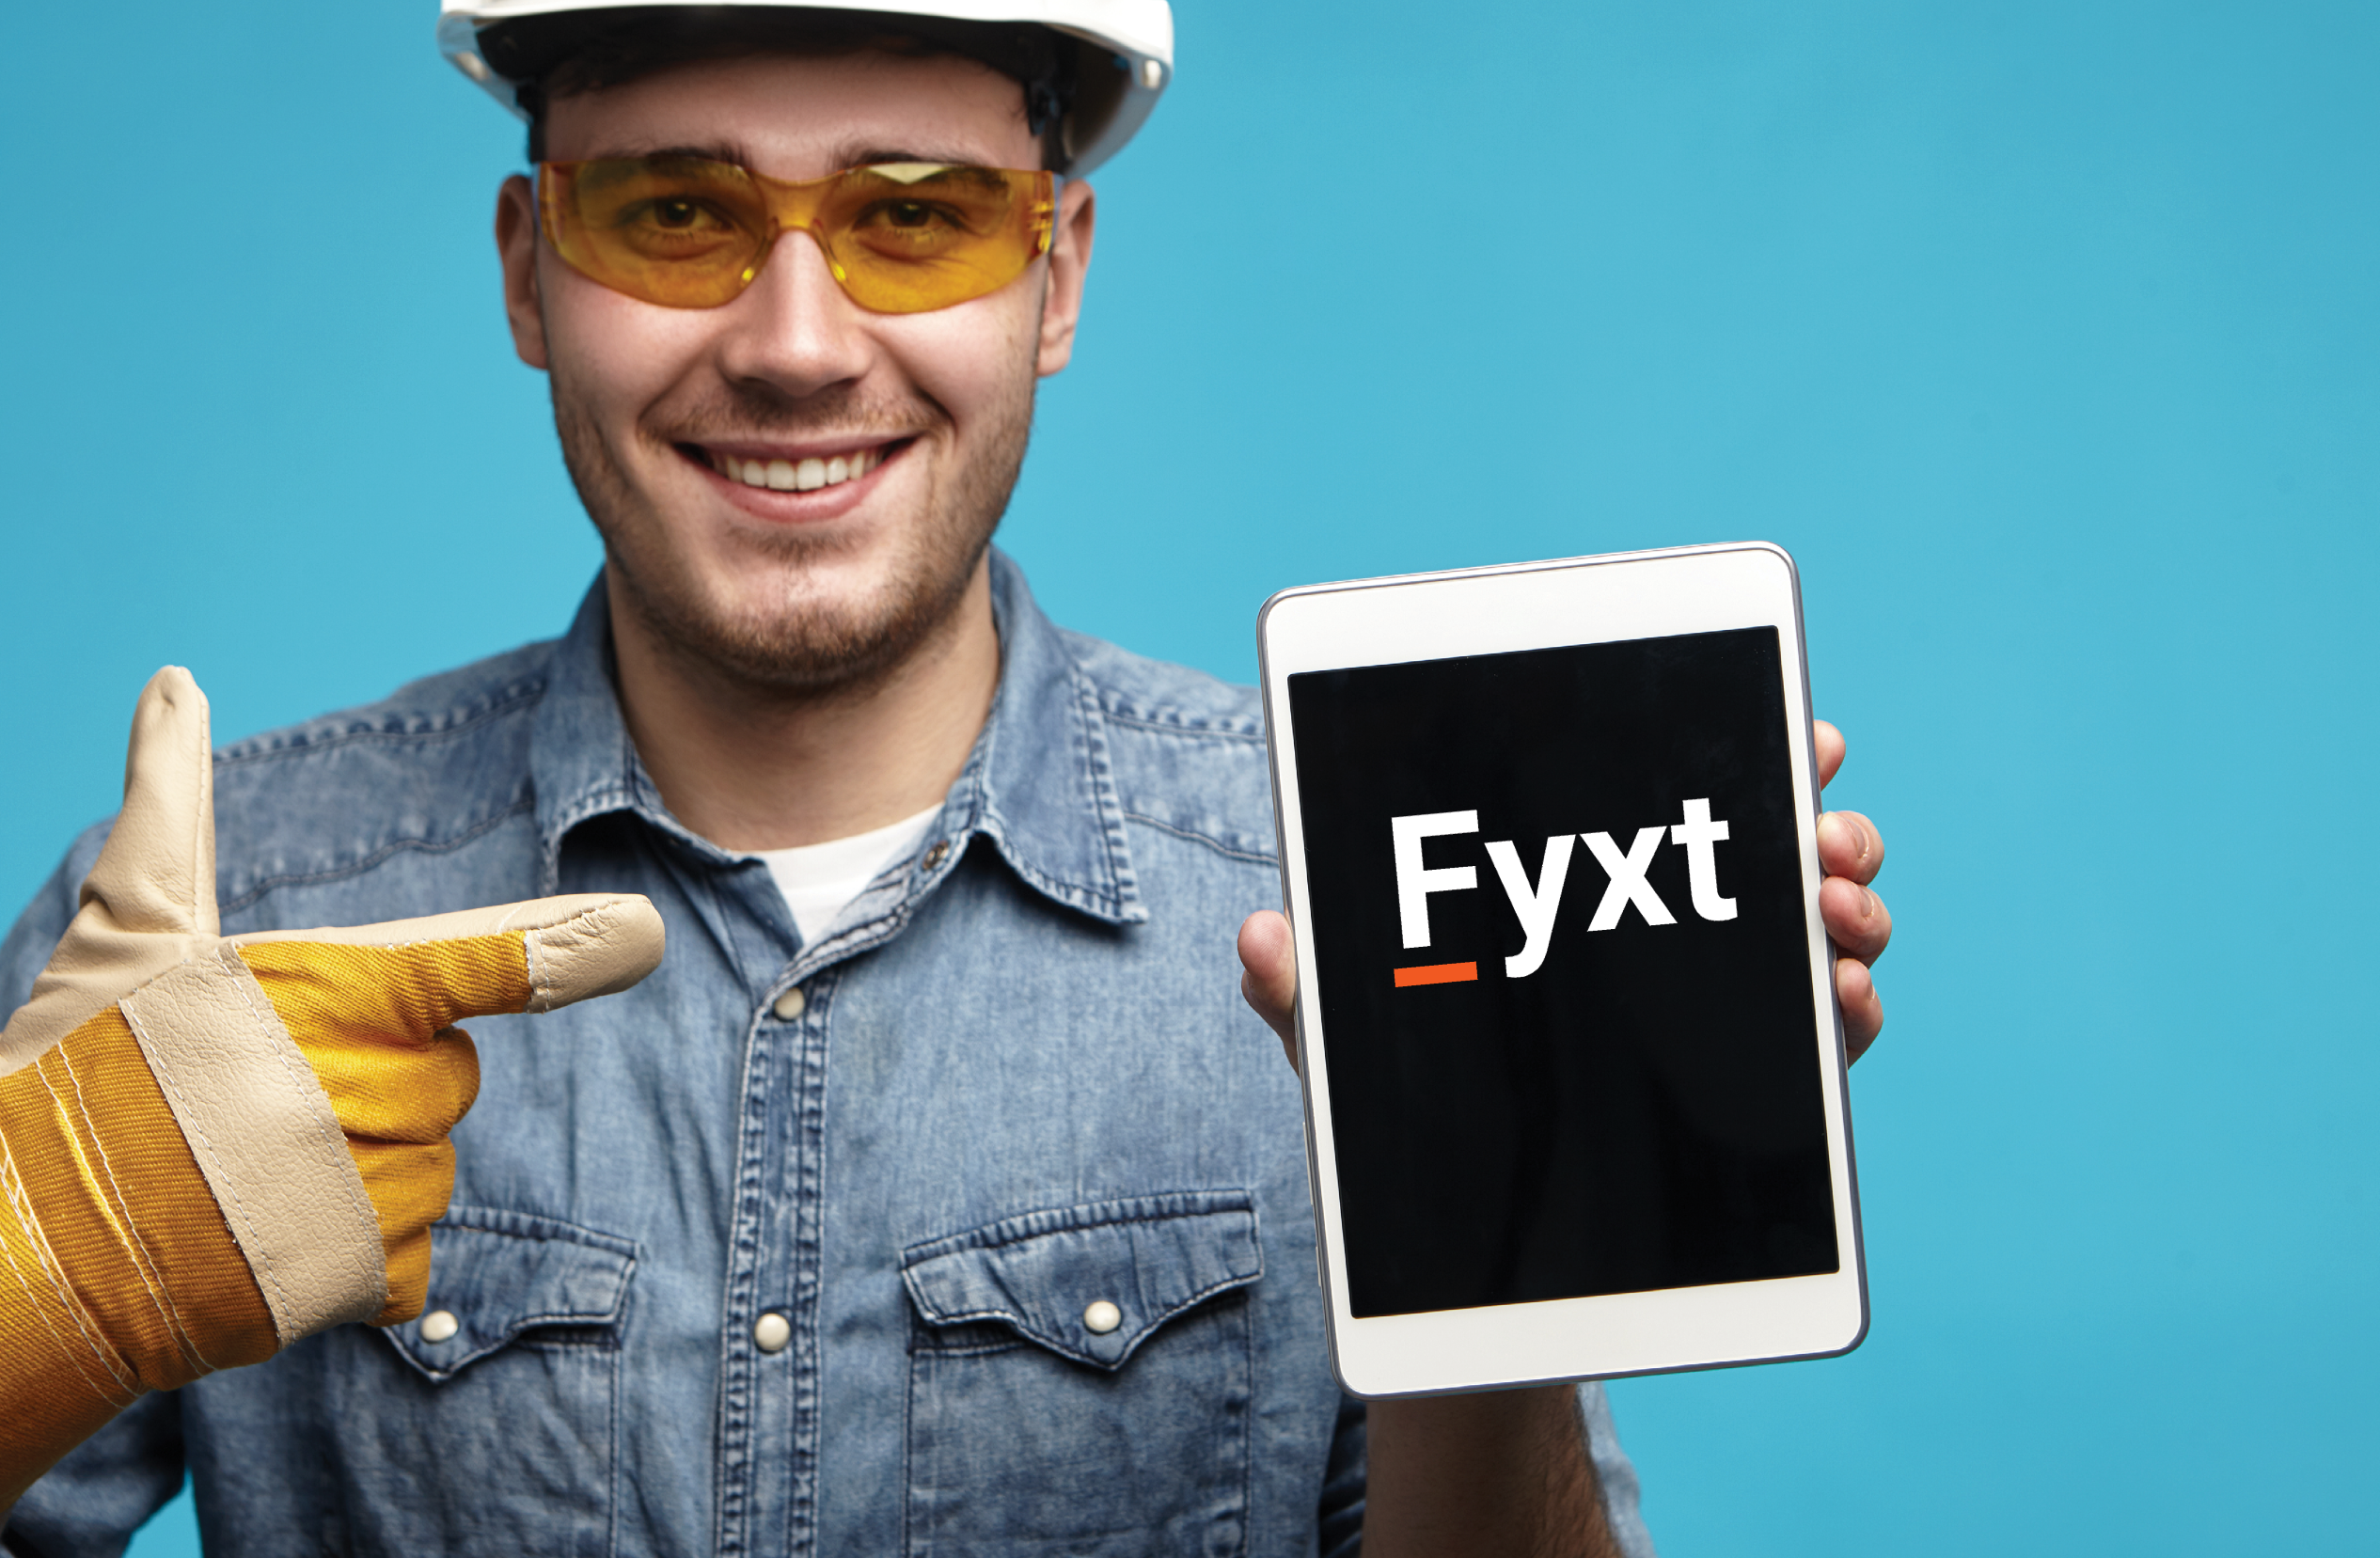 Service Pro with Fyxt app